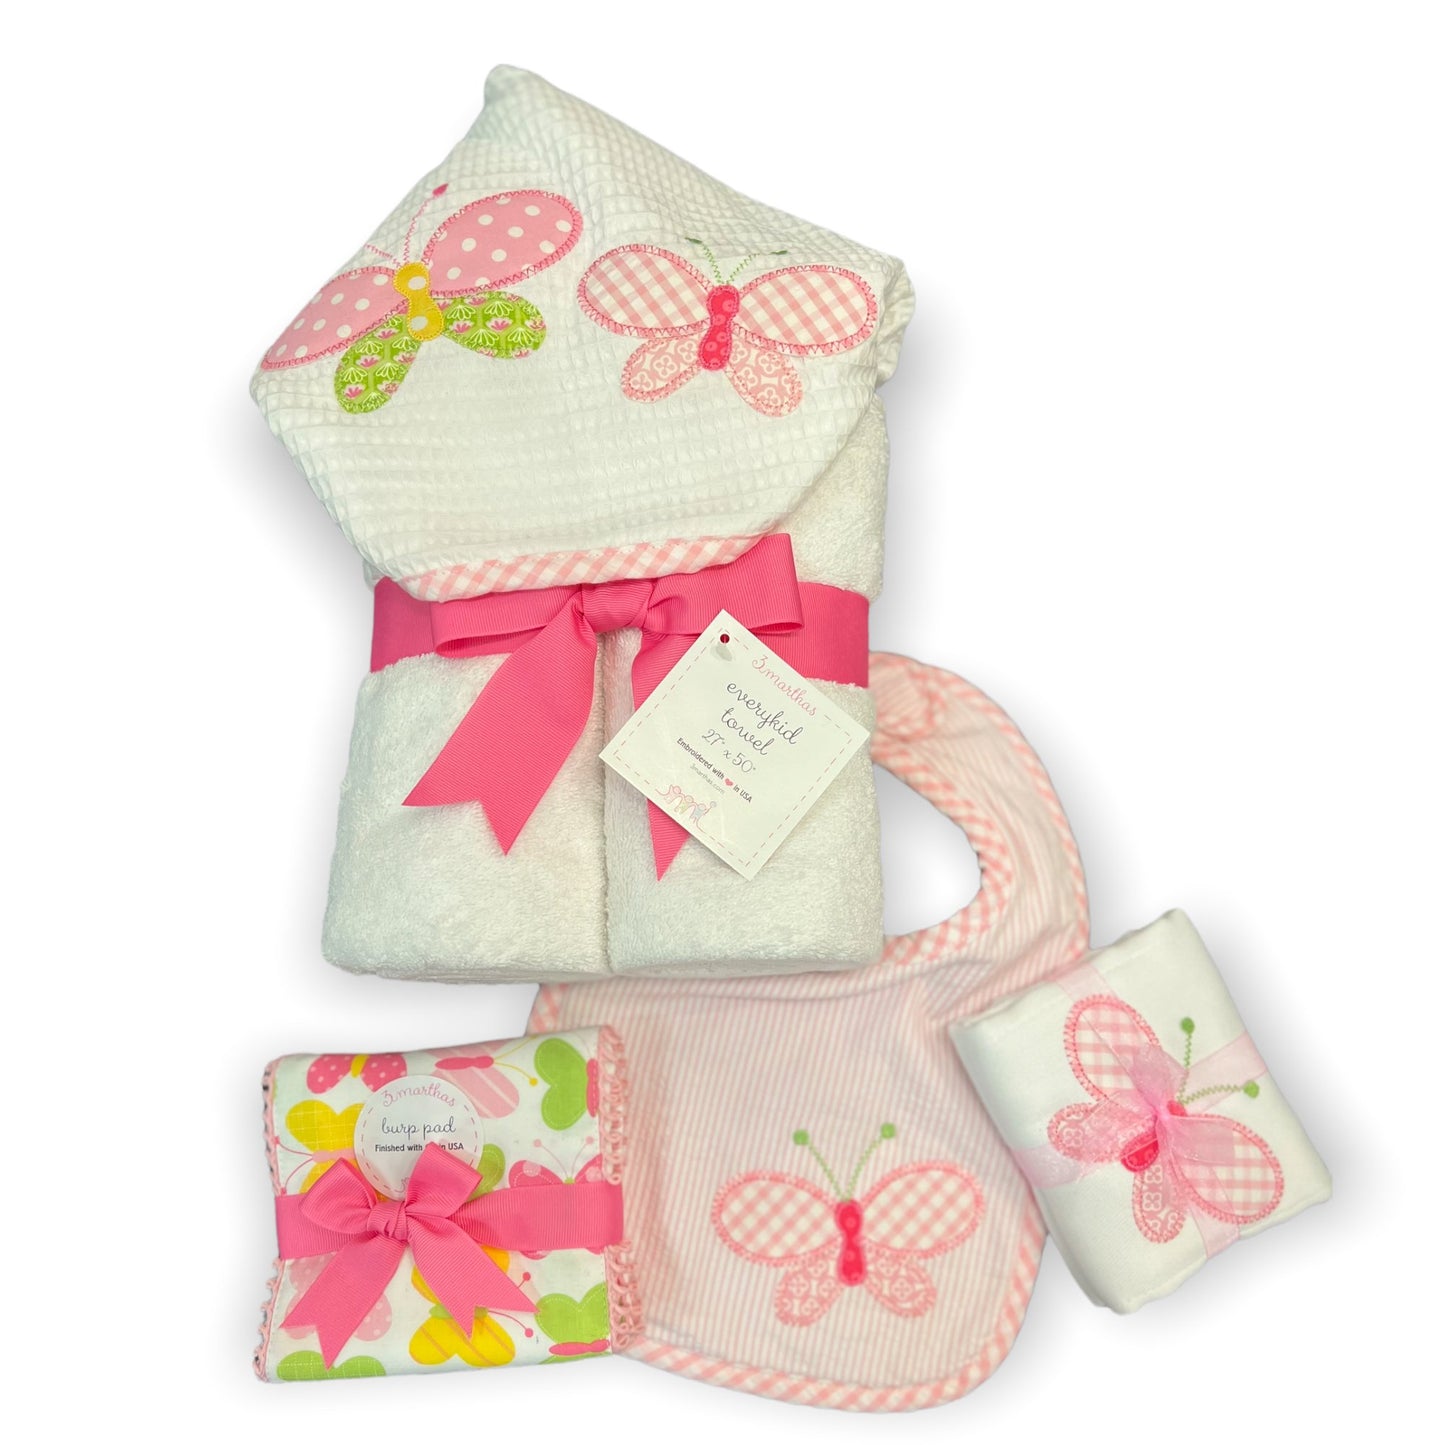 Butterfly Baby Gift Set - The Bump & Company LLC